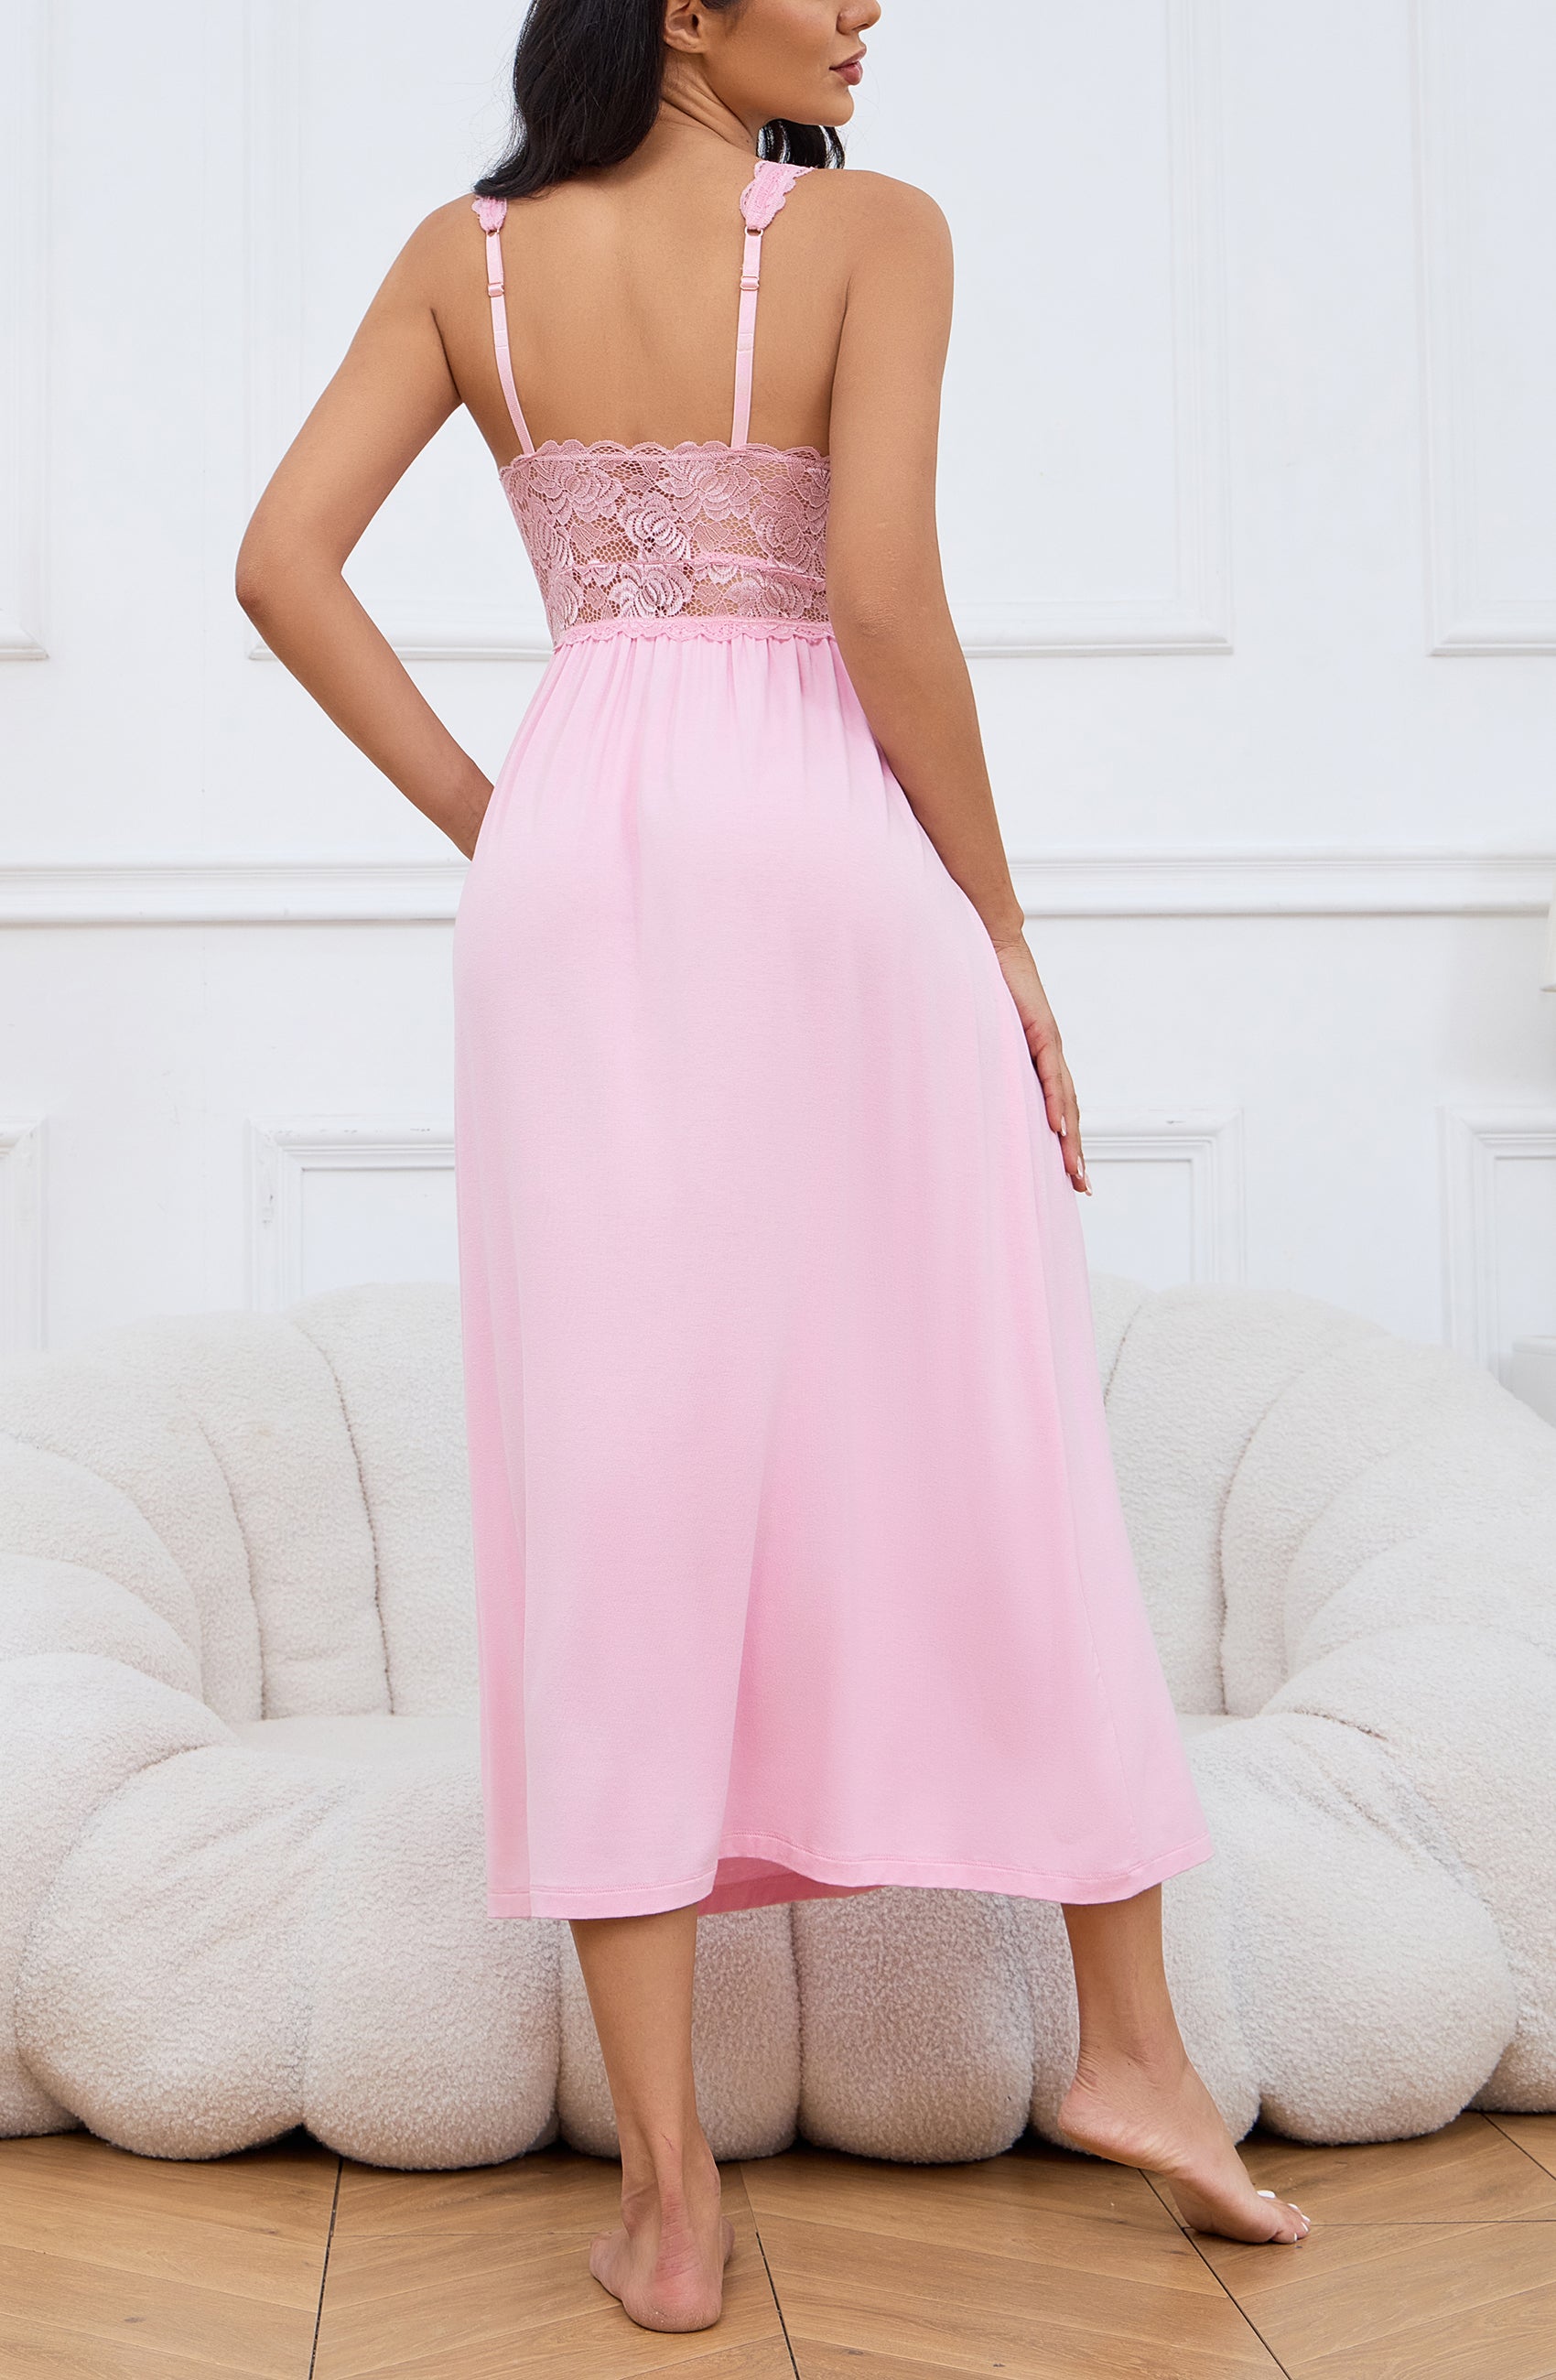 Sexy Lace Jersey Elegant Long Nightgown Chemises-PINK